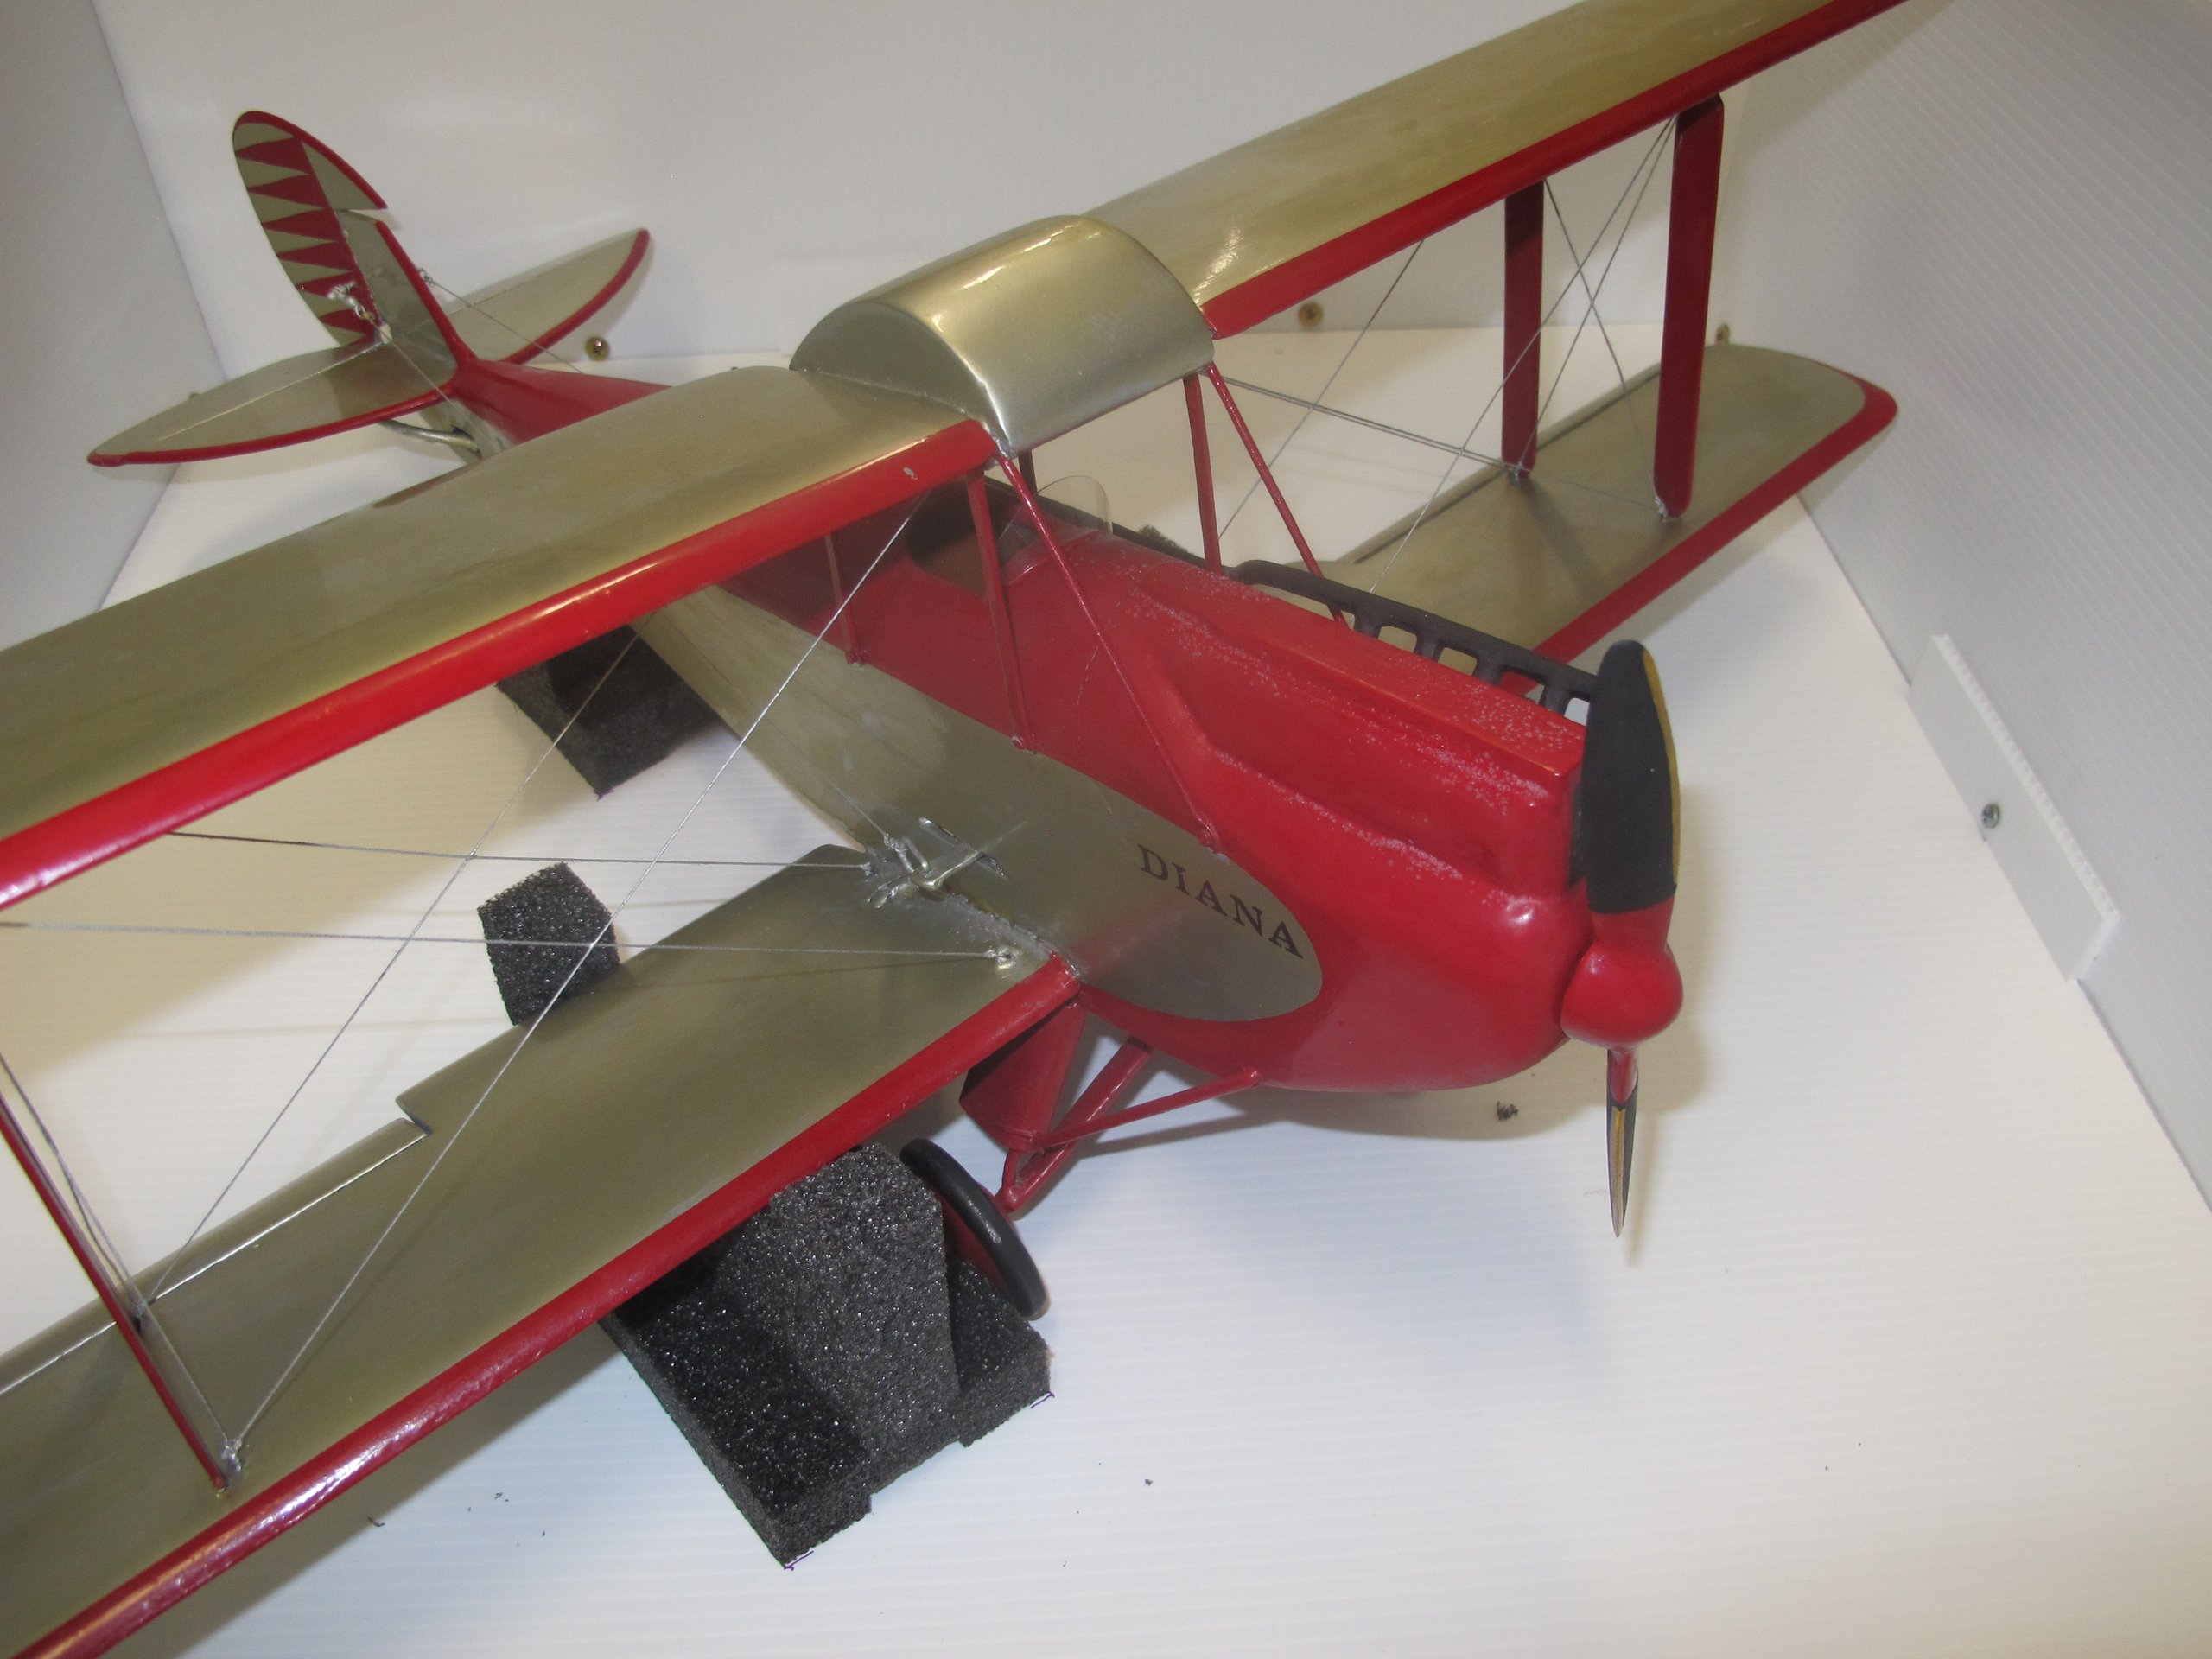 Model of Nancy Lyle's Gipsy Moth aircraft "Diana" VH-UKV made by Arch Dunne